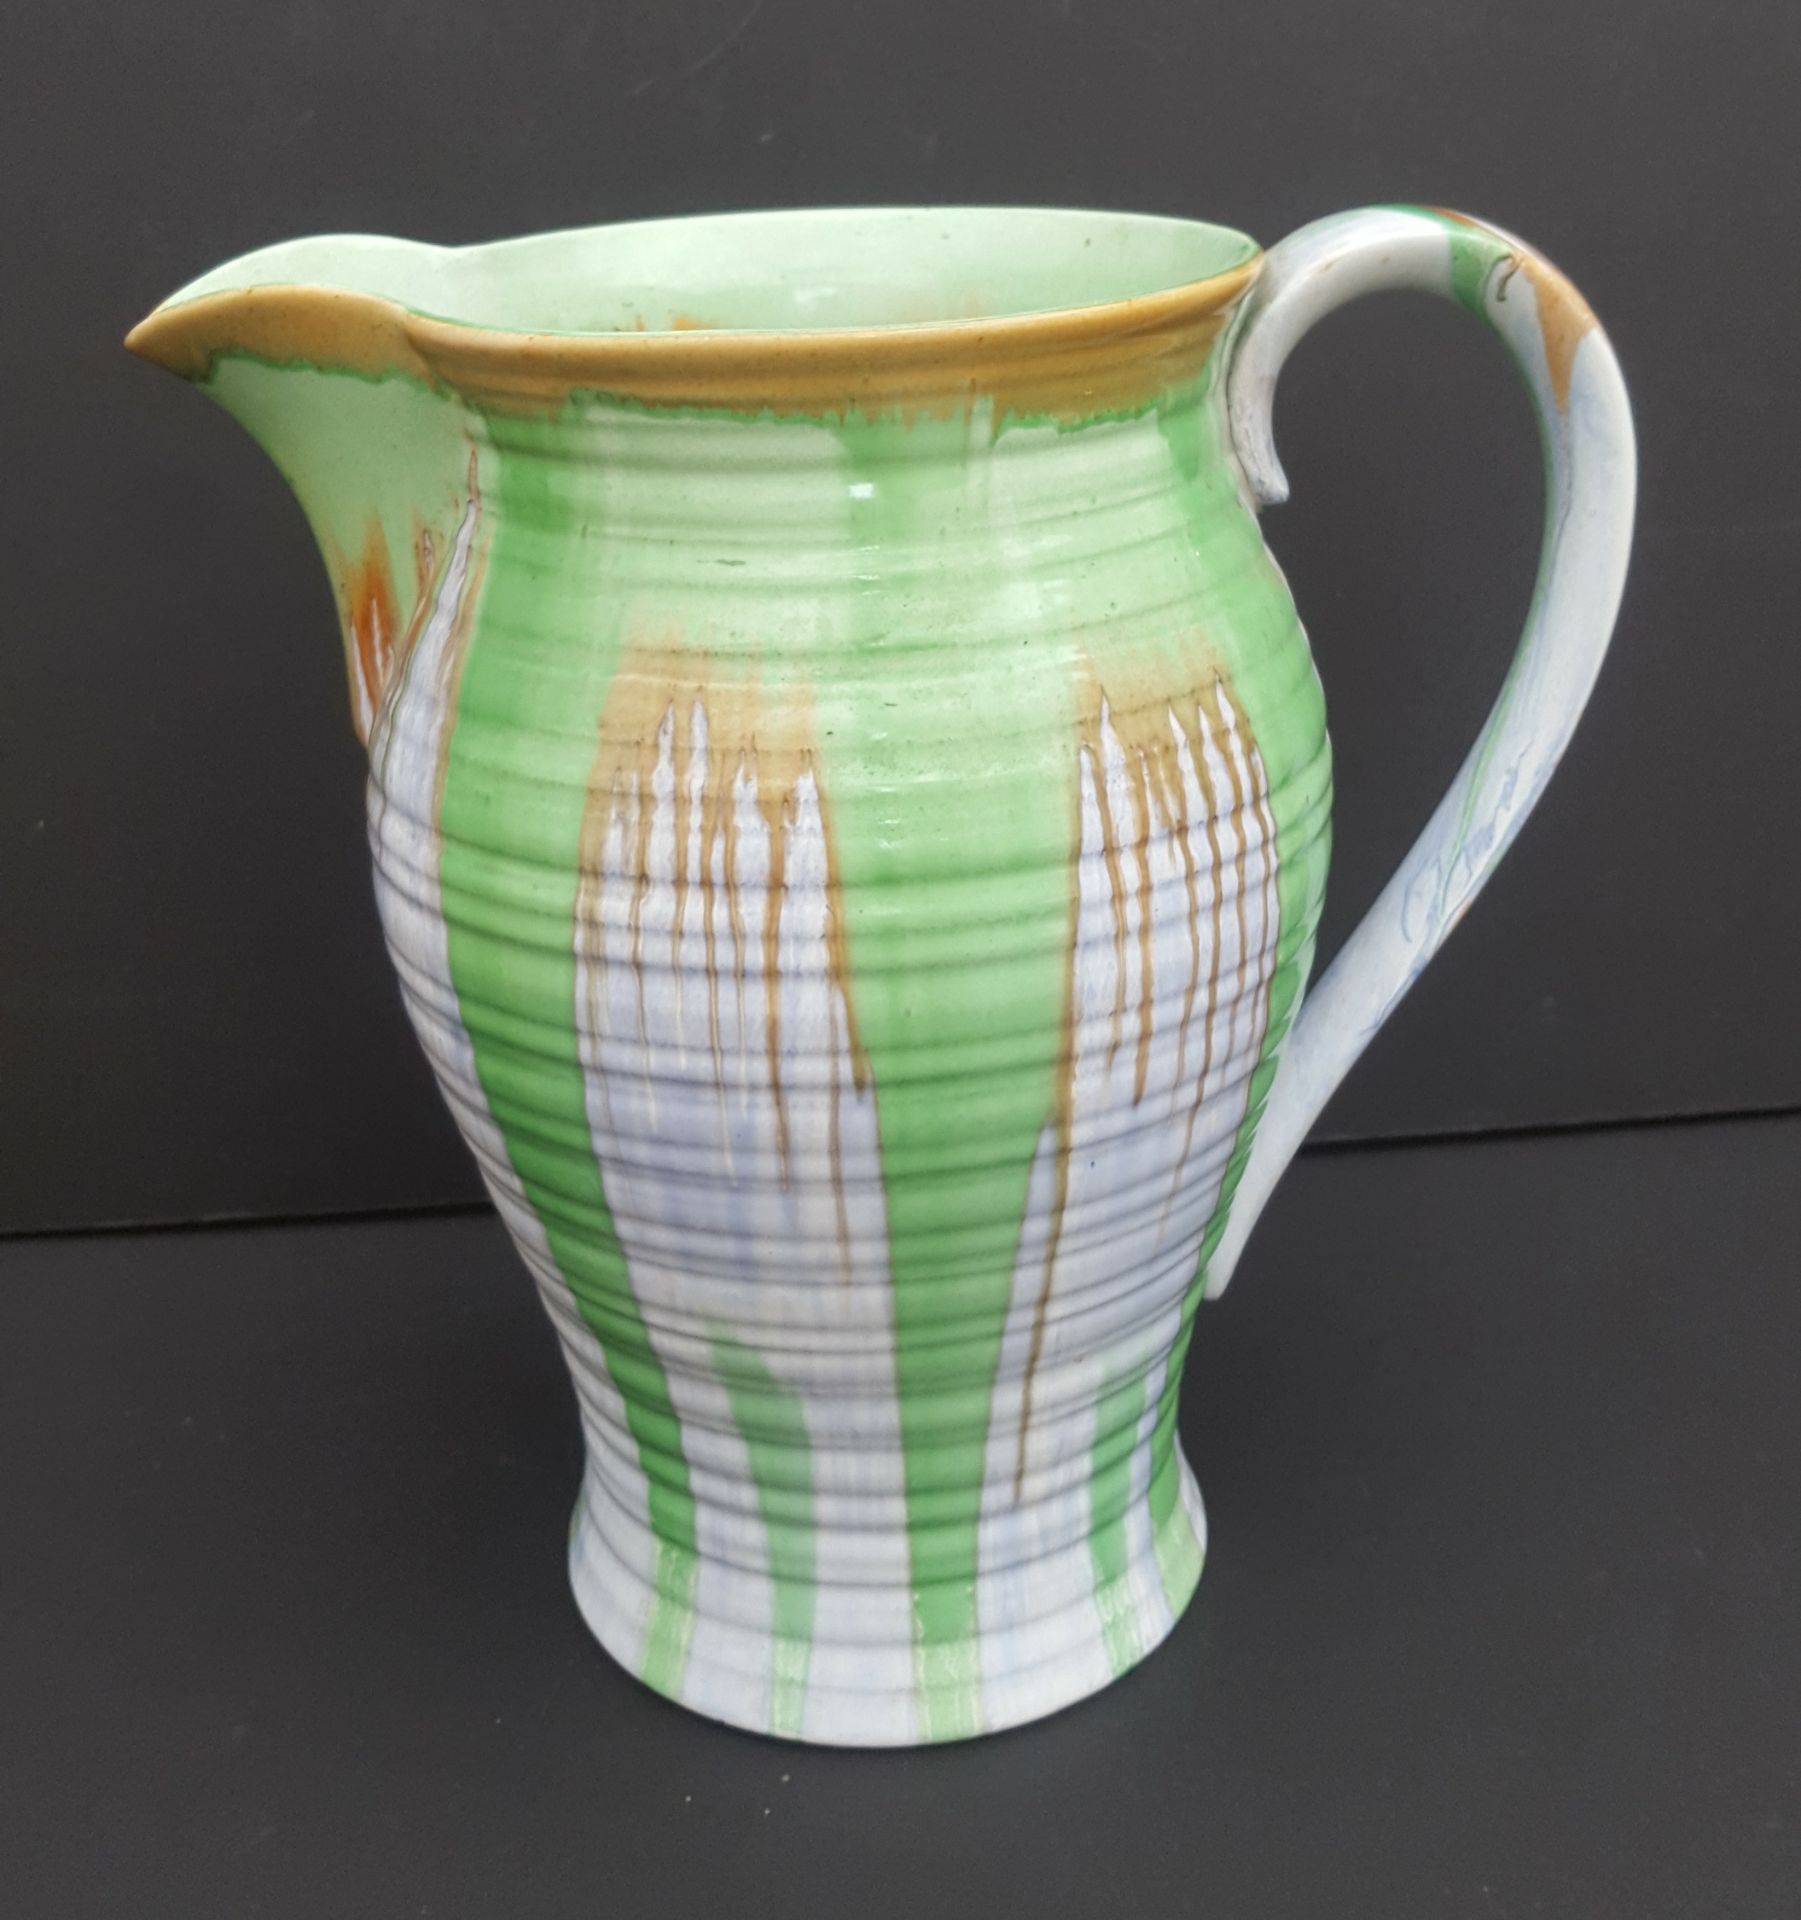 Vintage Retro Shelley Pottery Harmony Drip Ware Jug or Pitcher - Image 2 of 3